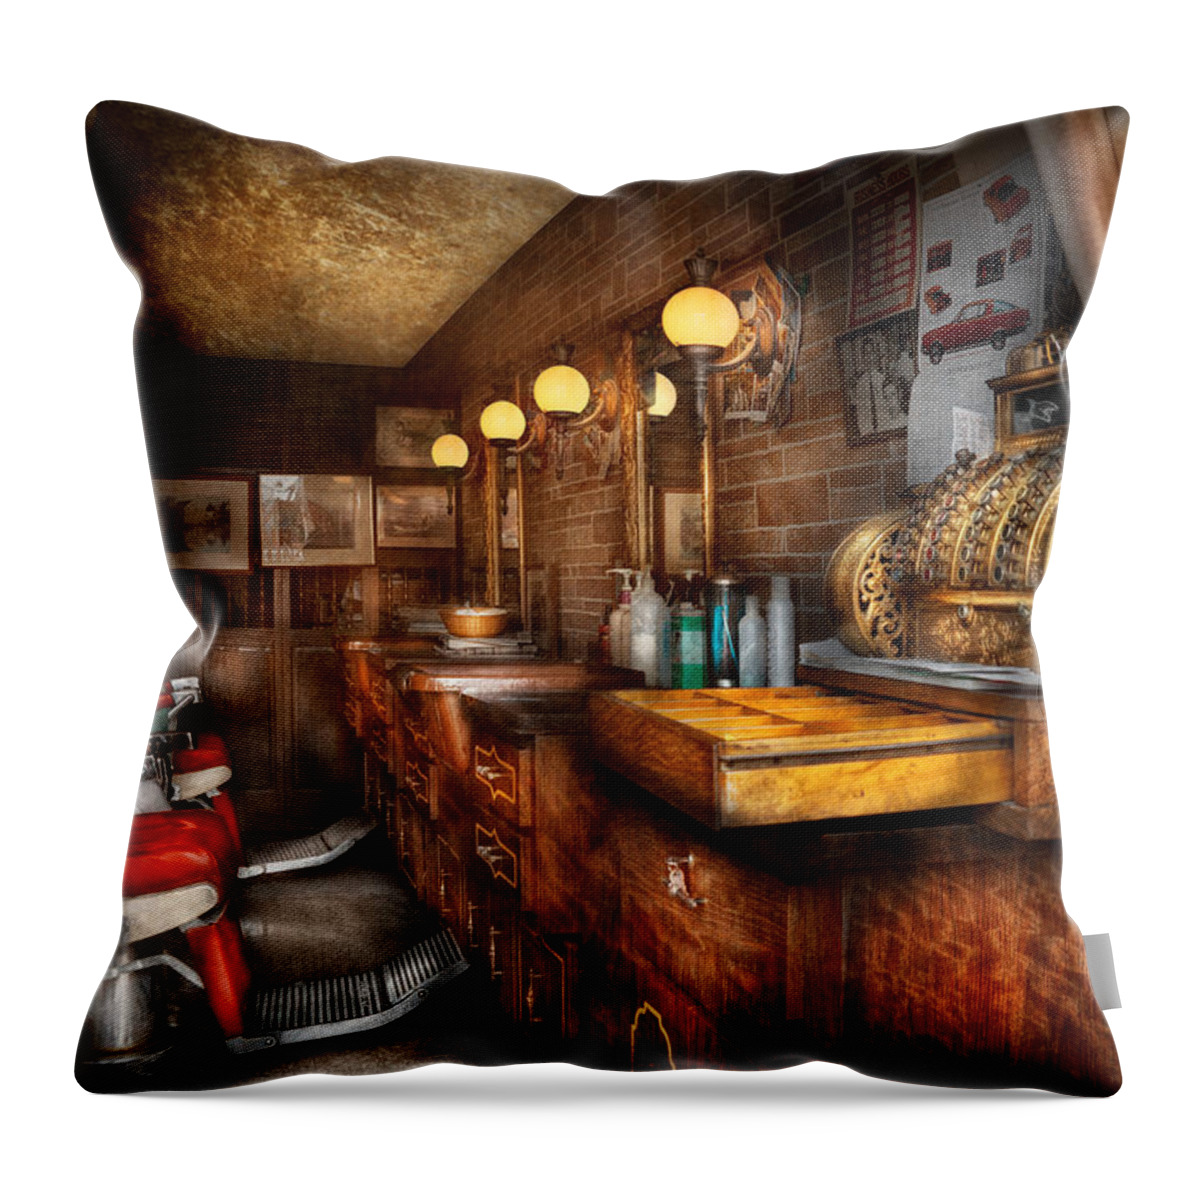 Barber Throw Pillow featuring the photograph Barber - Closed on Sundays by Mike Savad